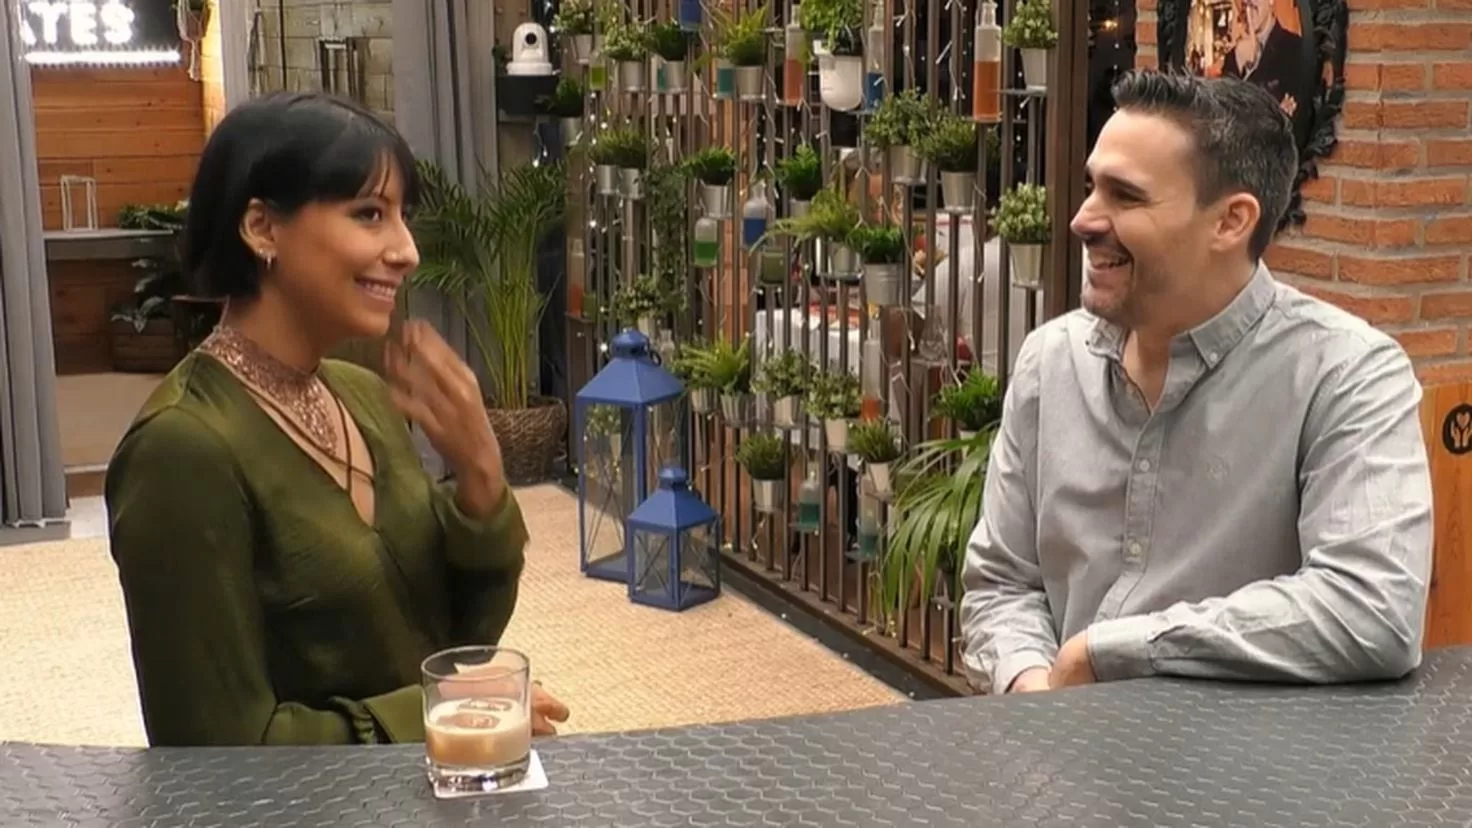 The strange taste of a First Dates single who asked to change her name
